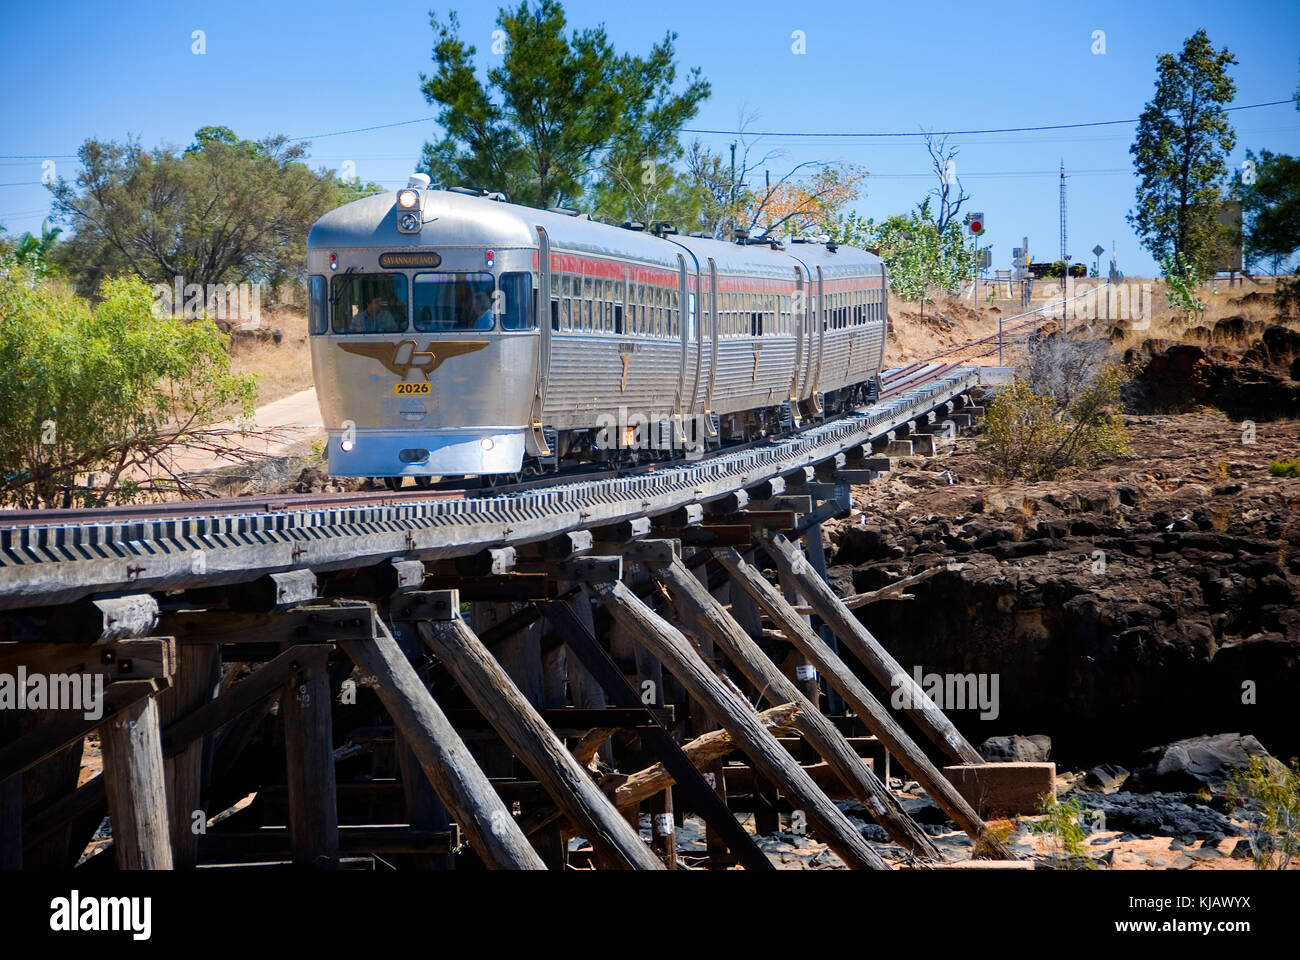 The Savannahlander tourist train crossing the Copperfield River at Einasleigh in the Queensland Gulf country Stock Photo